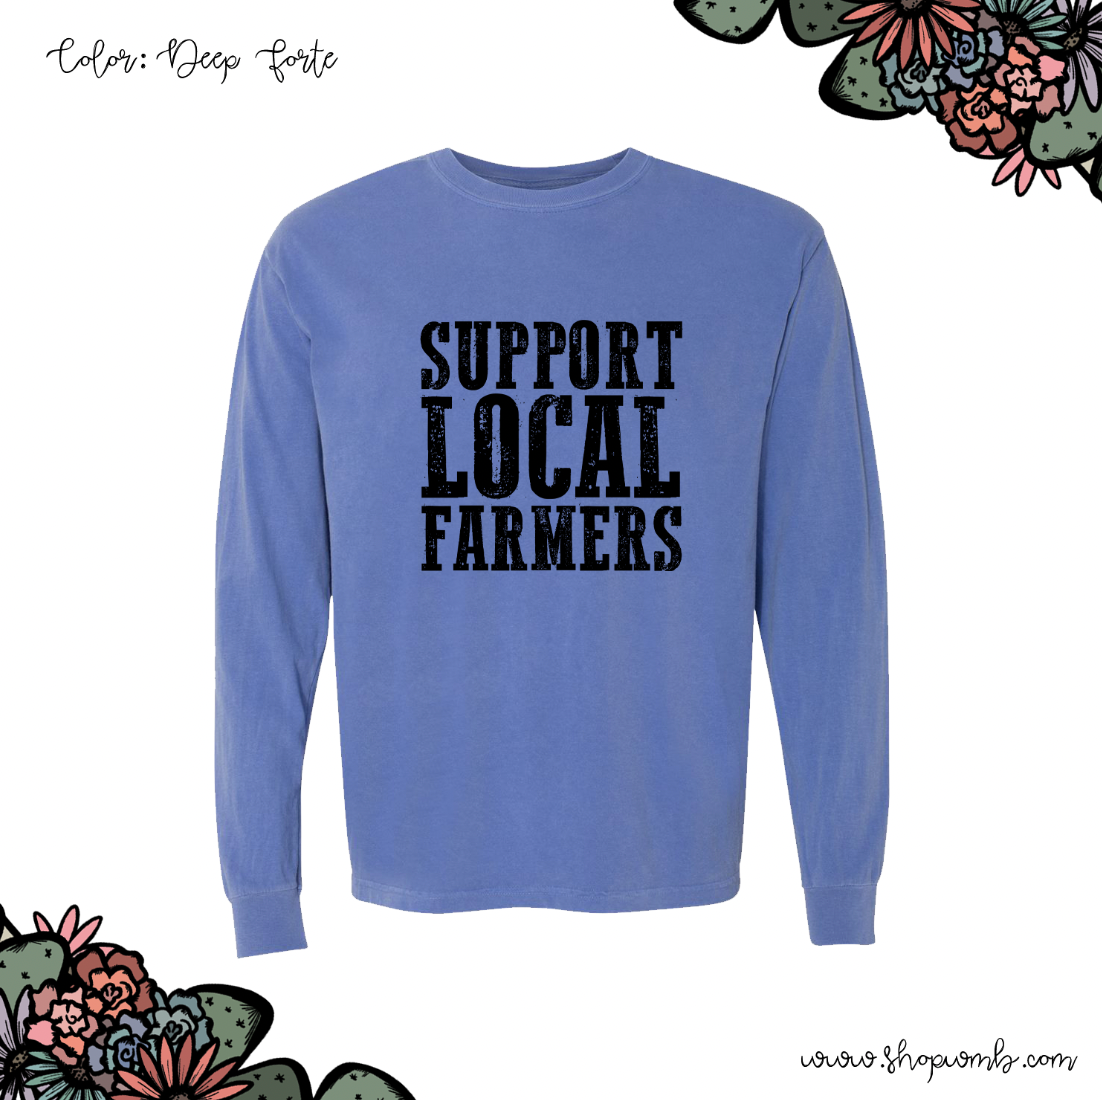 Support Local Farmers LONG SLEEVE T-Shirt (S-3XL) - Multiple Colors!